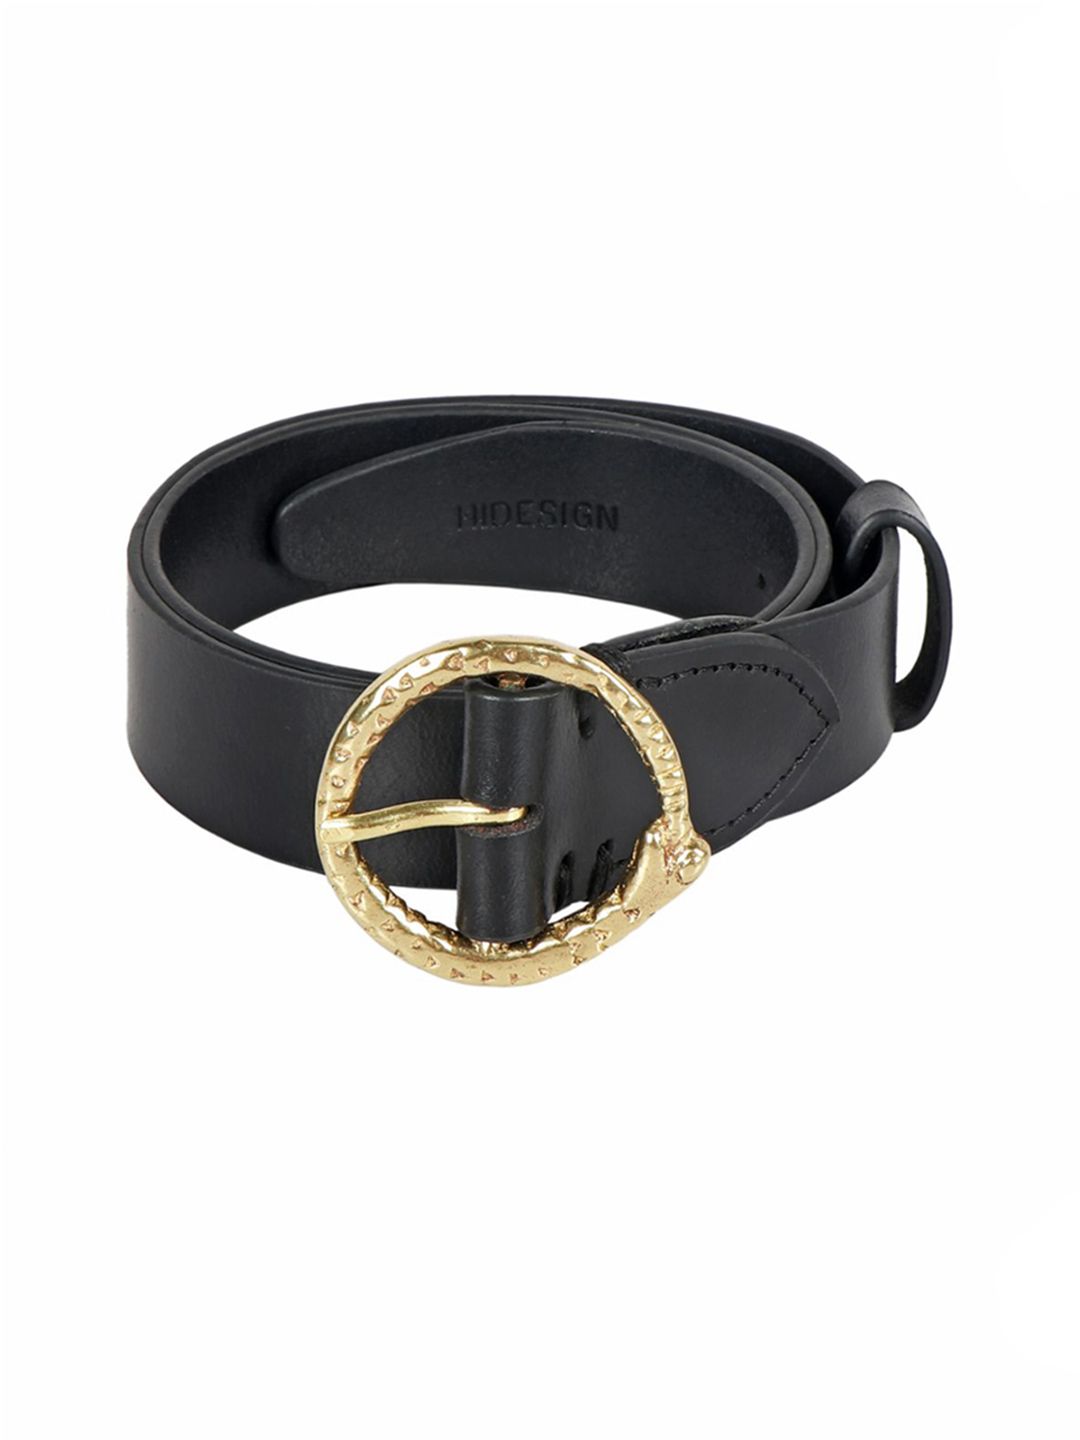 Hidesign Women Black Solid Leather Belt Price in India